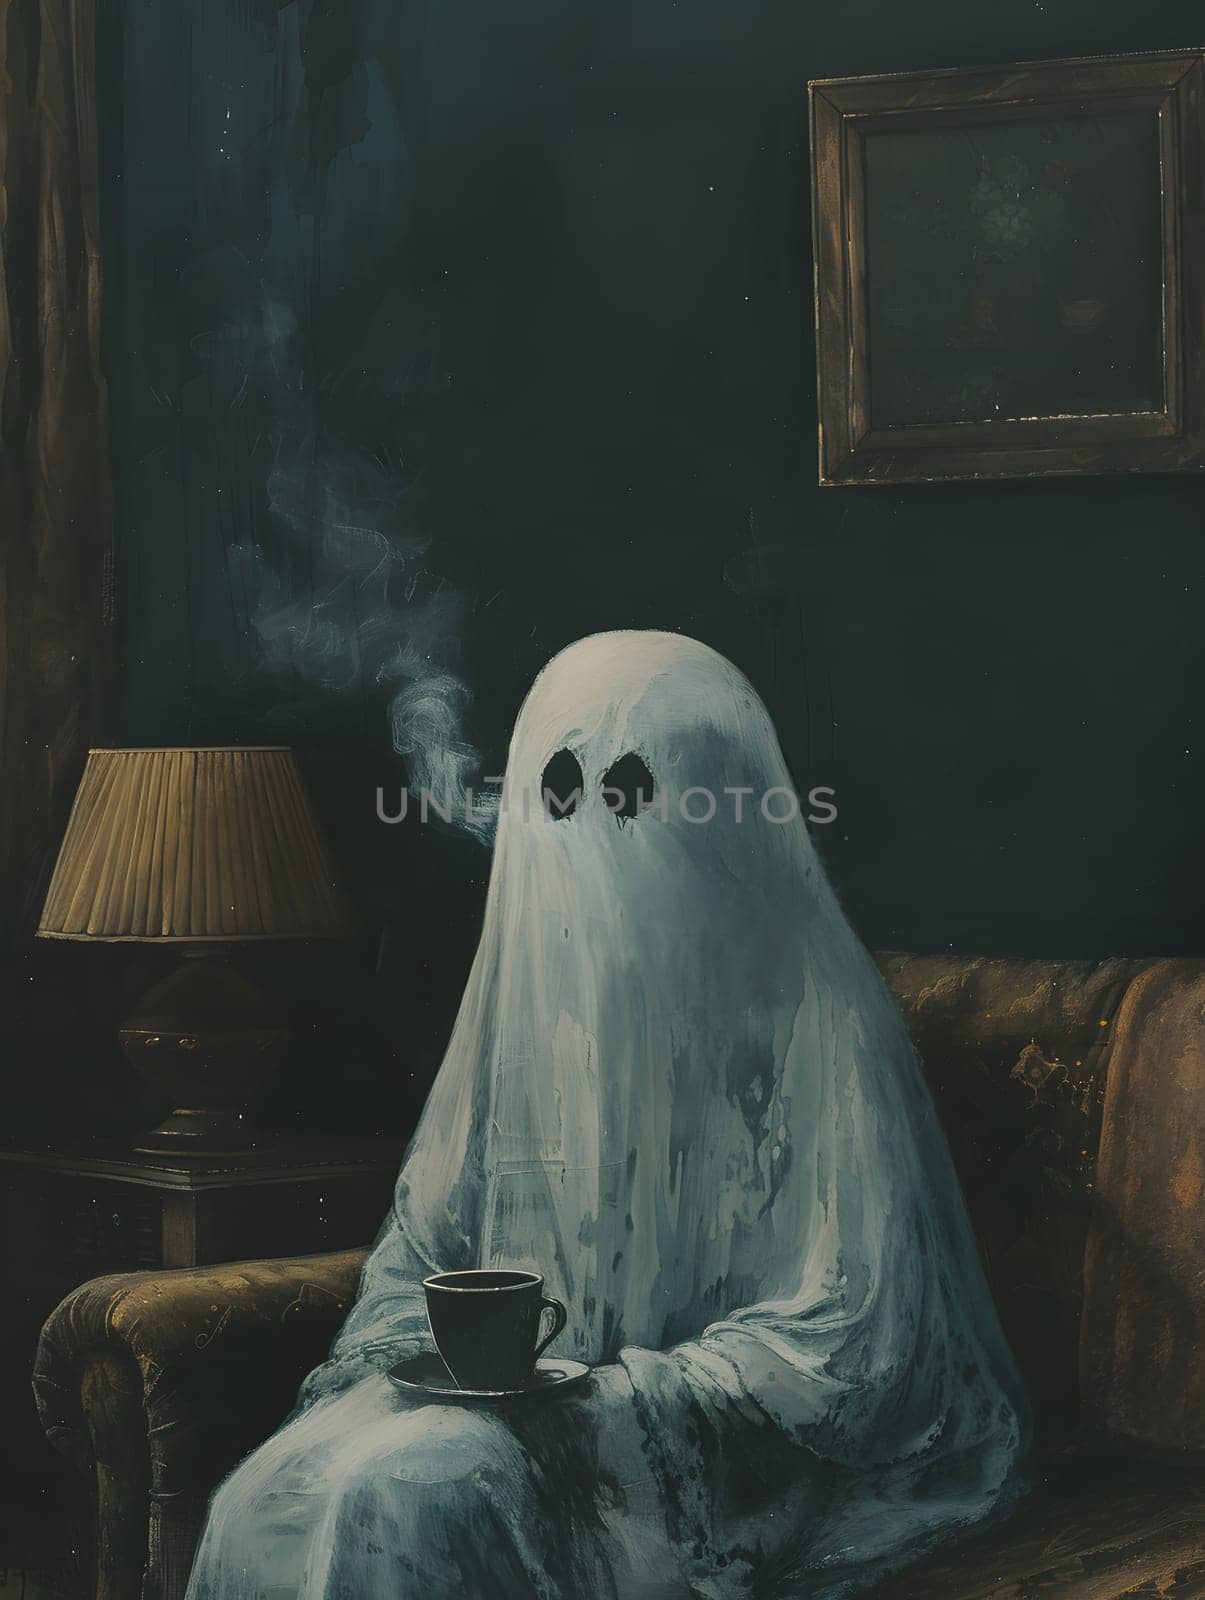 A ghost, a fictional character, is sitting on a wooden couch in darkness, holding a cup of coffee. This scene could be depicted in visual arts like painting or sculpture